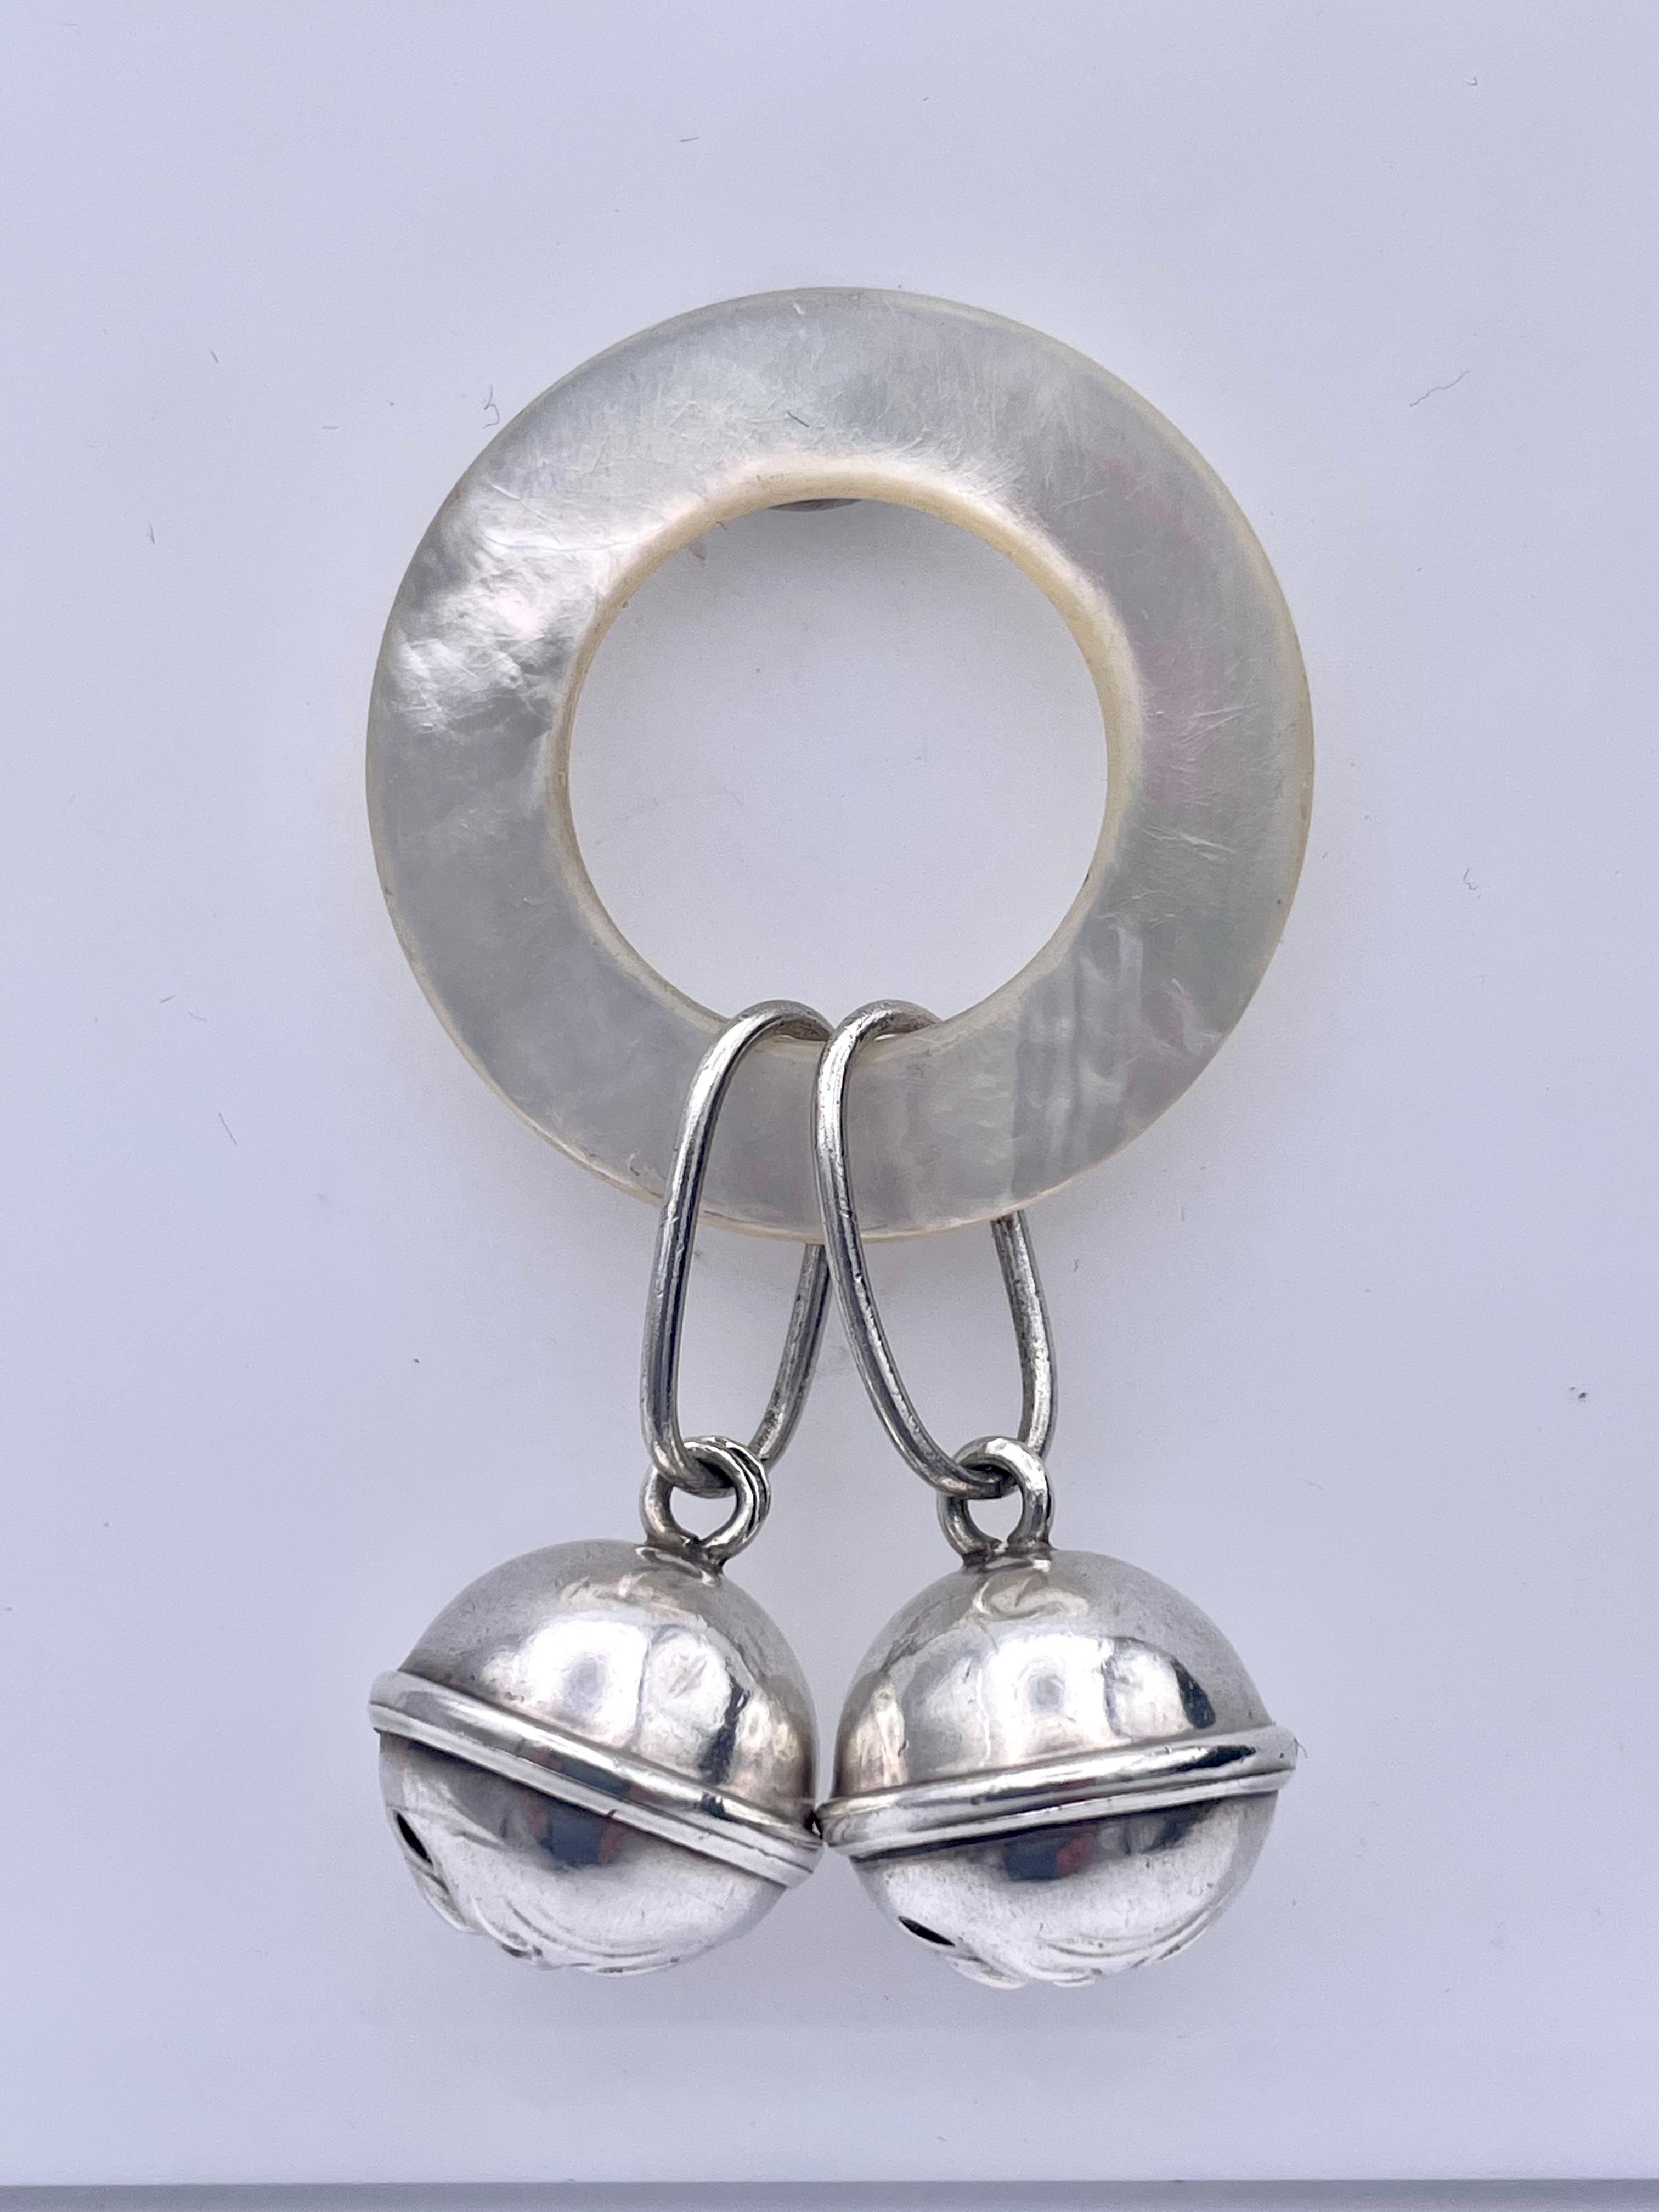 Whimsical baby rattle: two bells with man-in-the-moon faces.  Sterling silver on a mother-of-pearl ring.  American, c. 1890.  For a lucky much loved baby.

Alice Kwartler has sold the finest antique gold and diamond jewelry and silver for over forty